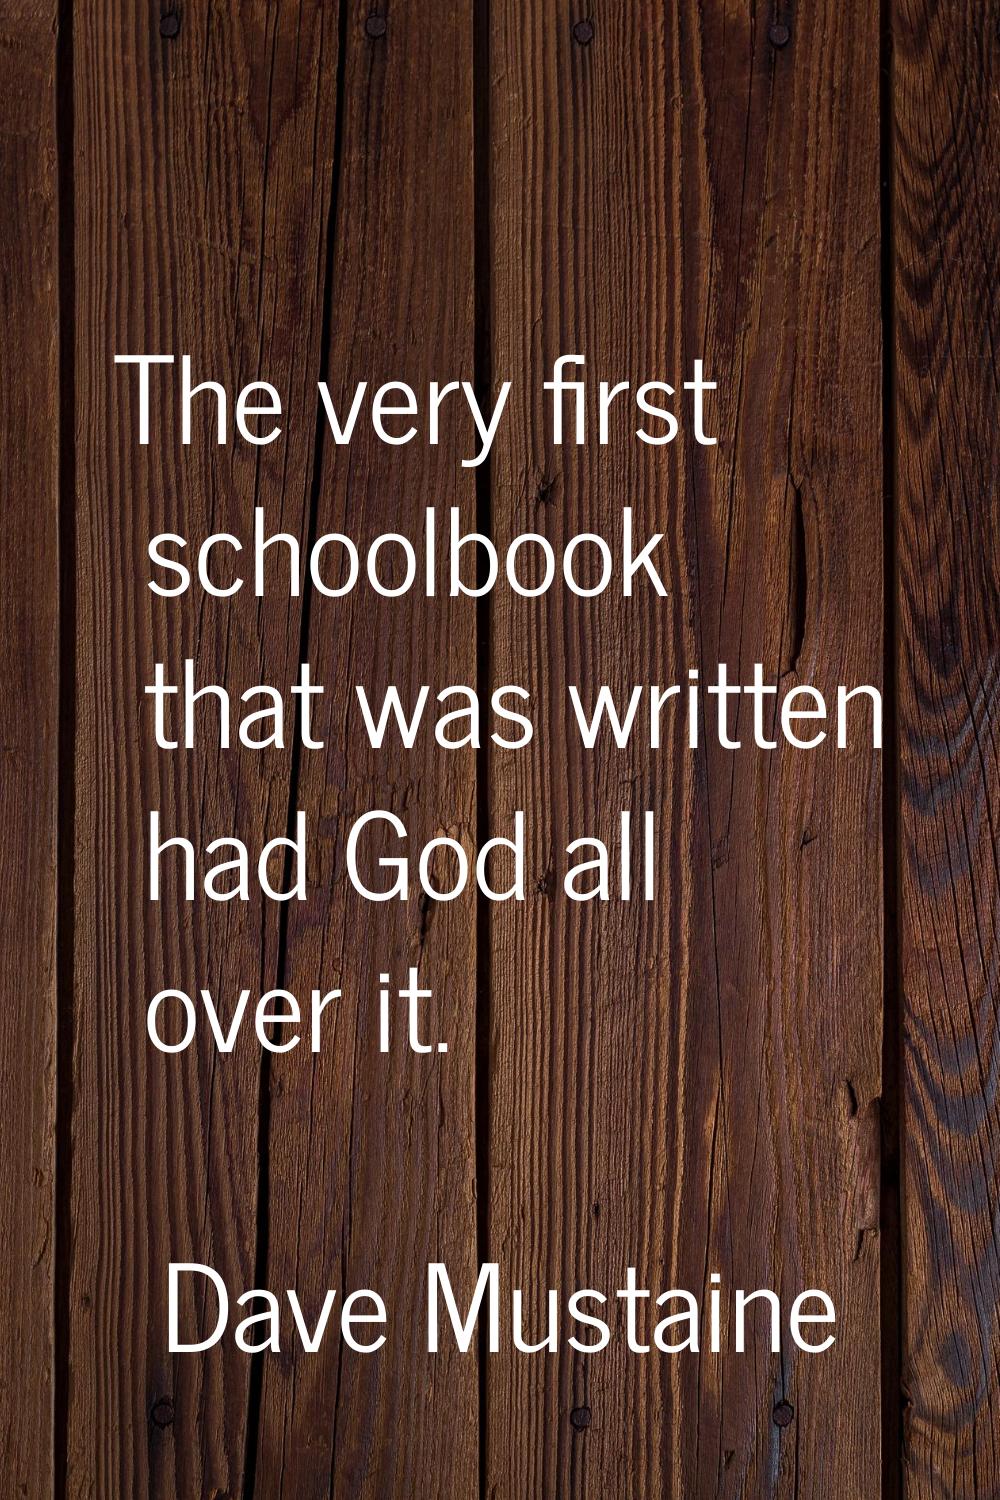 The very first schoolbook that was written had God all over it.